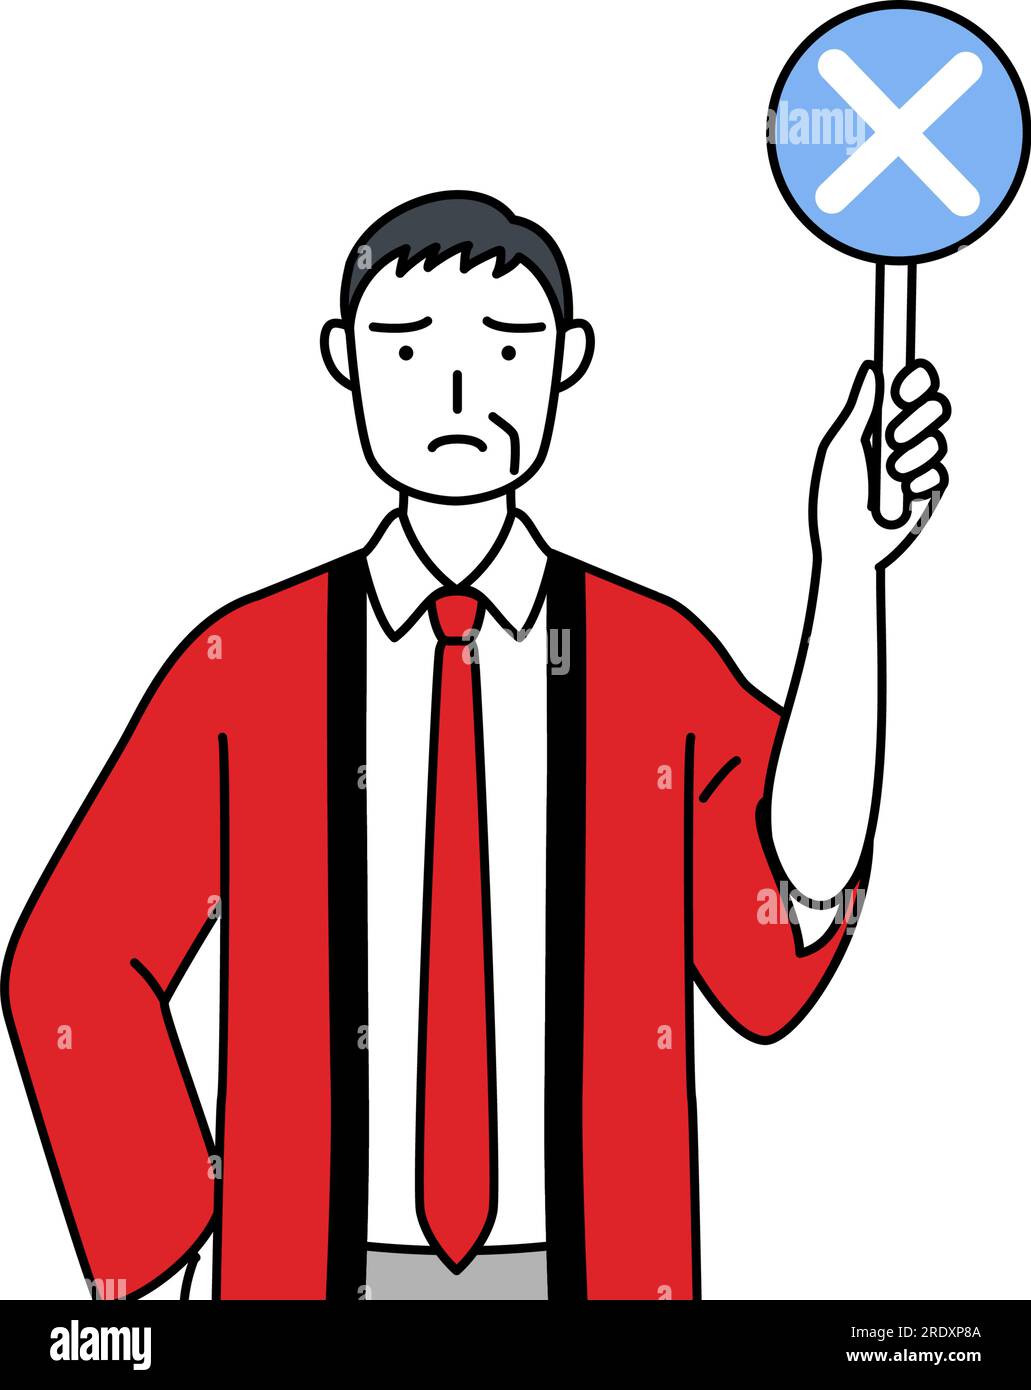 Senior man wearing a red happi coat holding a placard with an X indicating incorrect answer, Vector Illustration Stock Vector